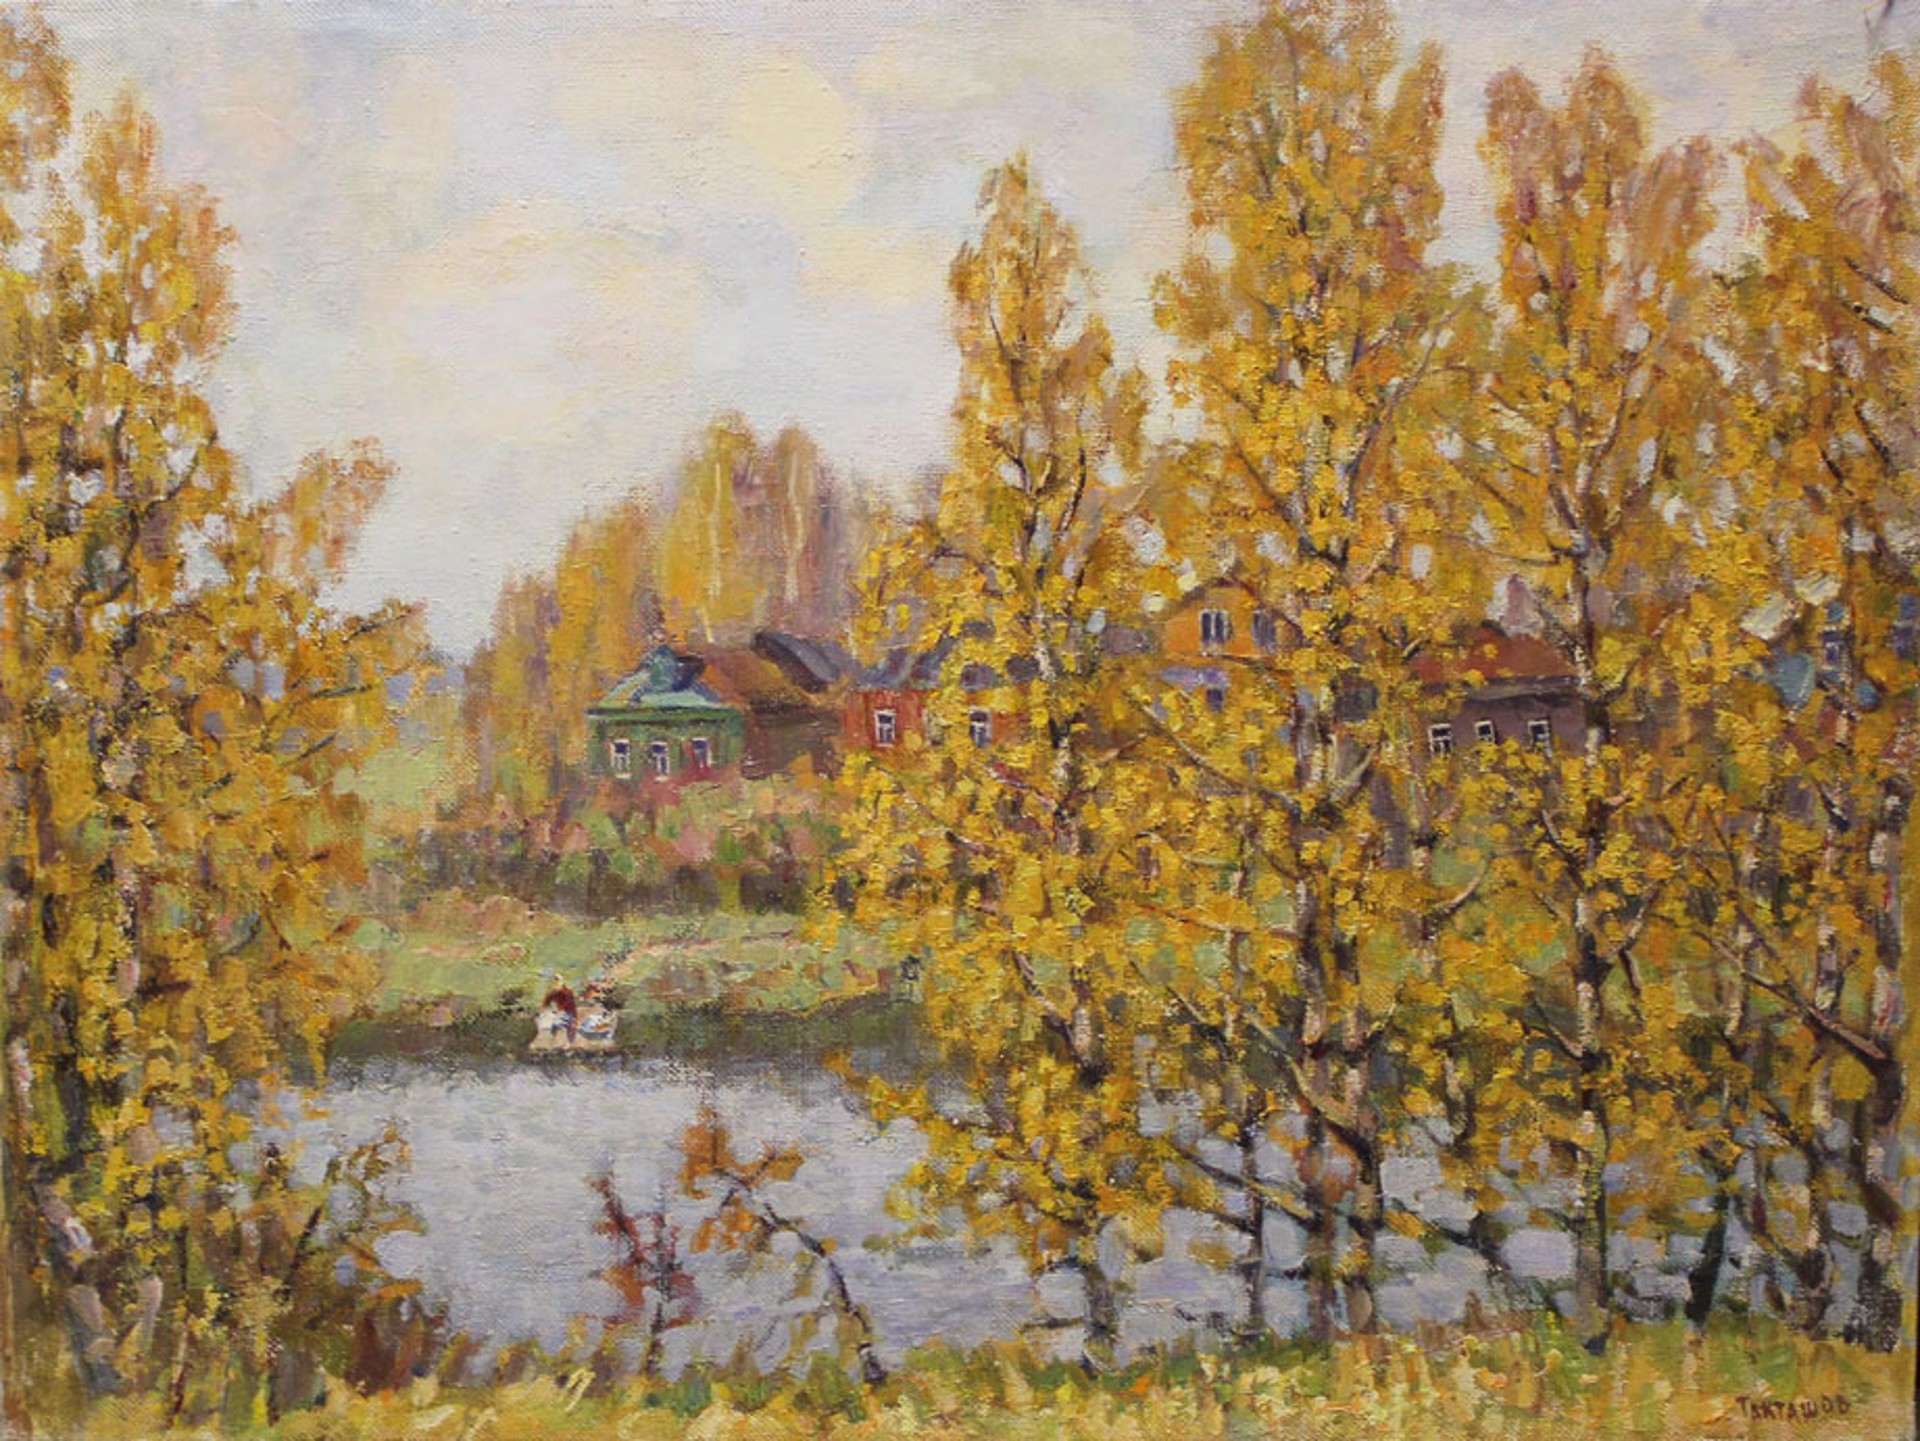 Autumn in the Country by Ismyatula Taktashov